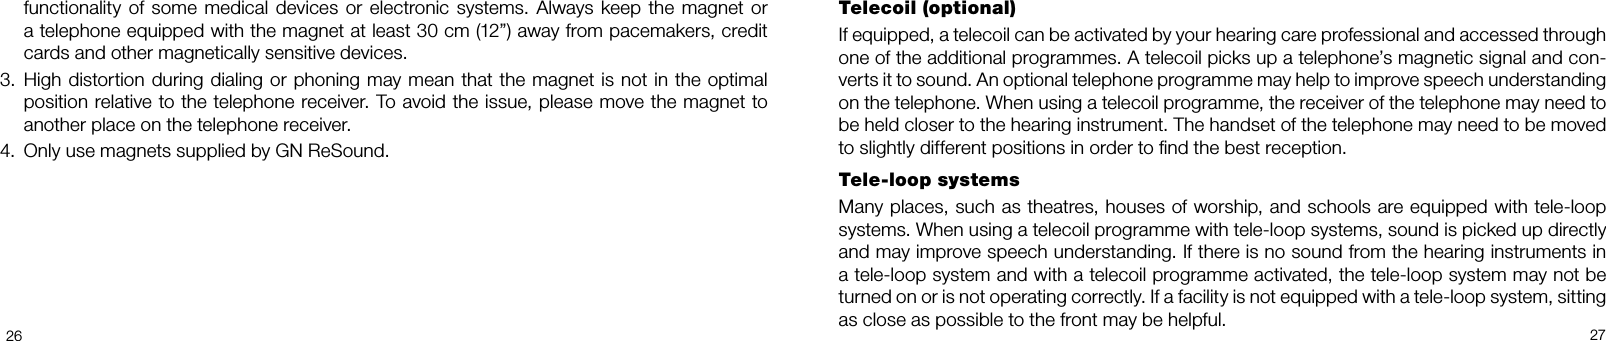 2627Telecoil (optional)If equipped, a telecoil can be activated by your hearing care professional and accessed through one of the additional programmes. A telecoil picks up a telephone’s magnetic signal and con-verts it to sound. An optional telephone programme may help to improve speech understanding on the telephone. When using a telecoil programme, the receiver of the telephone may need to be held closer to the hearing instrument. The handset of the telephone may need to be moved to slightly different positions in order to nd the best reception.Tele-loop systemsMany places, such as theatres, houses of worship, and schools are equipped with tele-loop systems. When using a telecoil programme with teleloop systems, sound is picked up directly and may improve speech understanding. If there is no sound from the hearing instruments in a tele-loop system and with a telecoil programme activated, the tele-loop system may not be turned on or is not operating correctly. If a facility is not equipped with a tele-loop system, sitting as close as possible to the front may be helpful.functionality  of  some  medical  devices  or  electronic  systems.  Always  keep  the  magnet  or a telephone equipped with the magnet at least 30 cm (12”) away from pacemakers, credit cards and other magnetically sensitive devices.3.  High distortion during dialing or phoning may mean that the magnet is not in the optimal position relative to the telephone receiver. To avoid the issue, please move the magnet to another place on the telephone receiver.4.  Only use magnets supplied by GN ReSound.